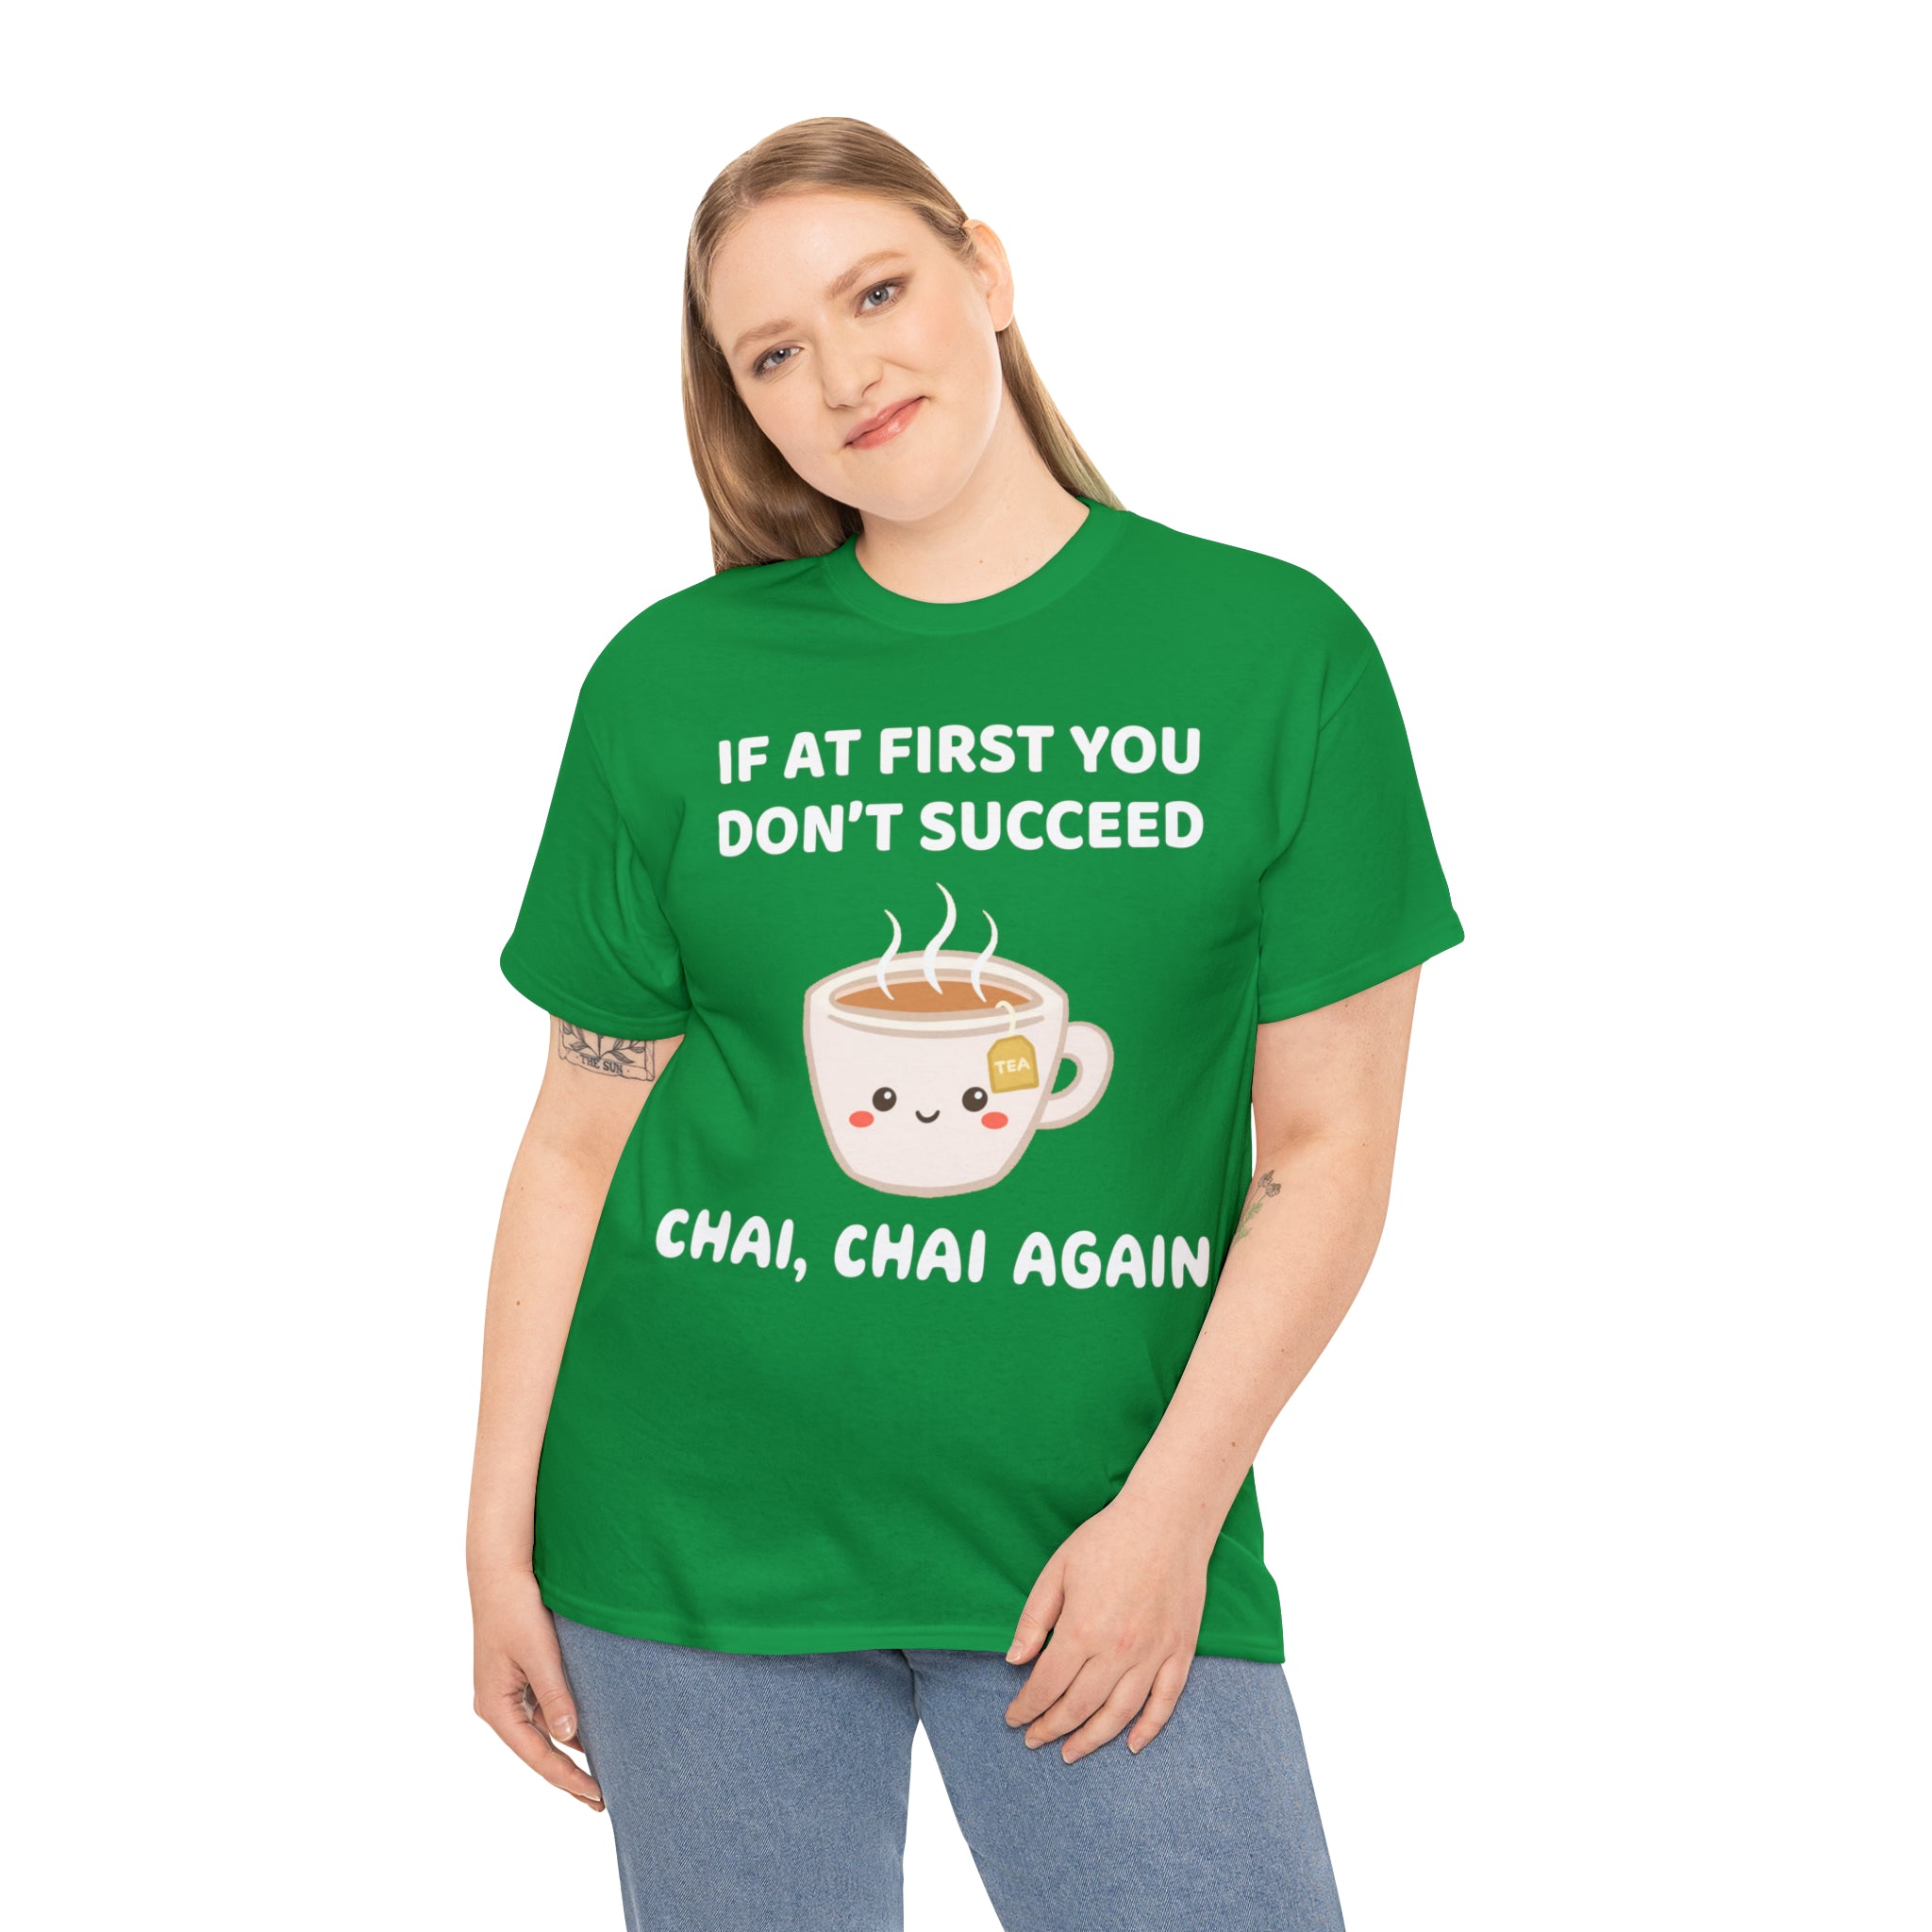 At First You Don't Succeed, Chai and Chai Again T-Shirt Designs by C&C